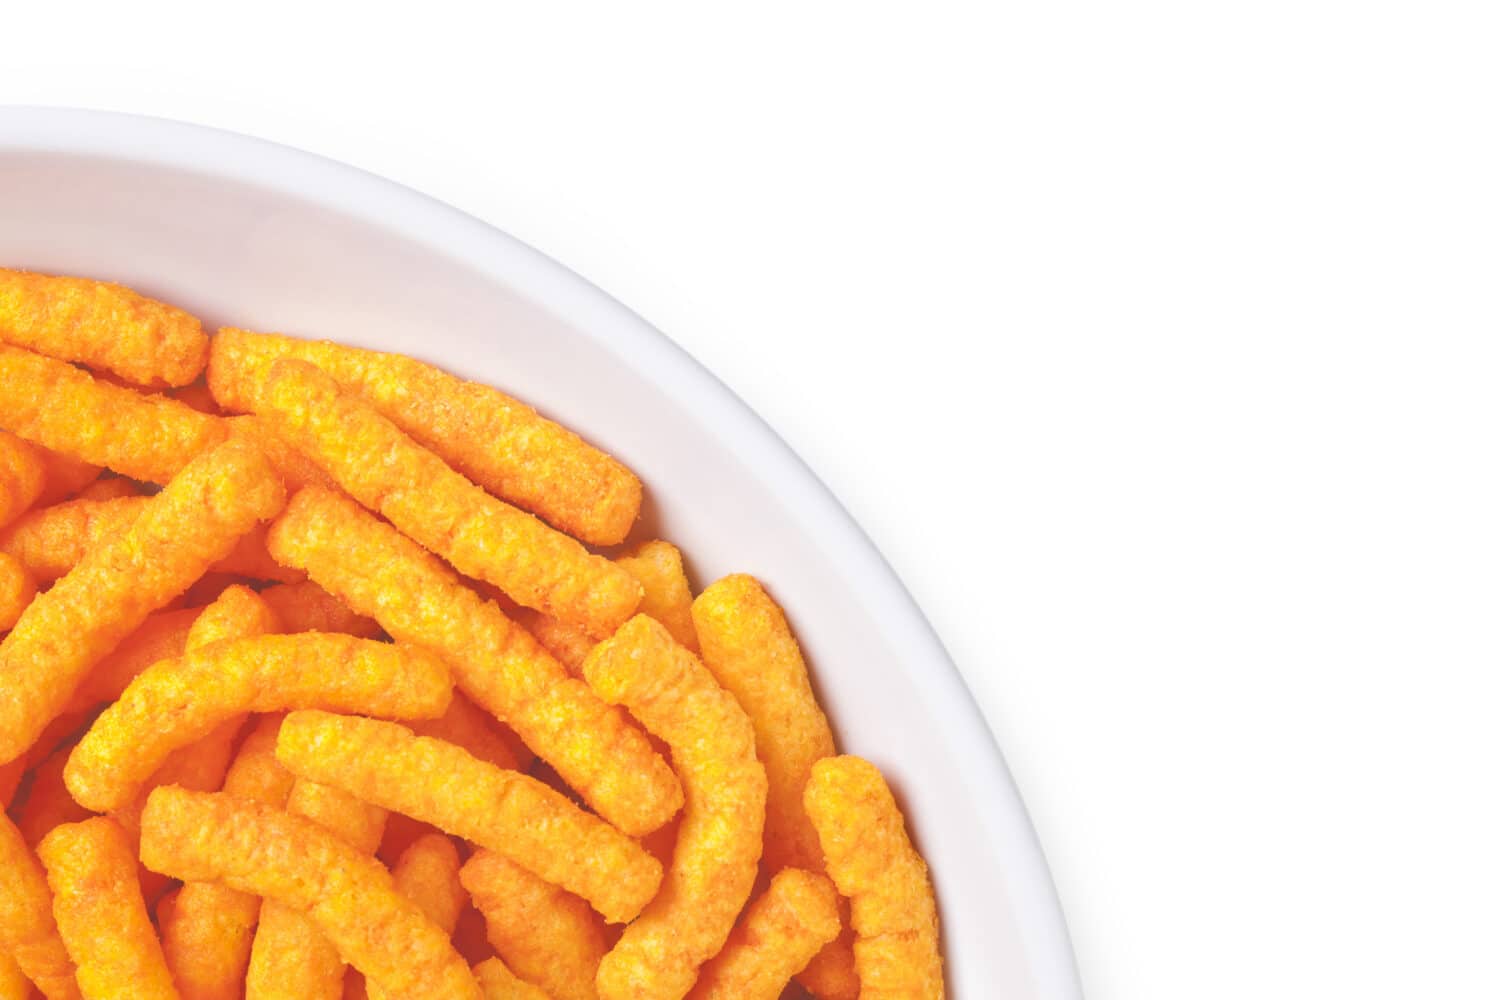 Cropped image of bowl of cheese puffs against white background